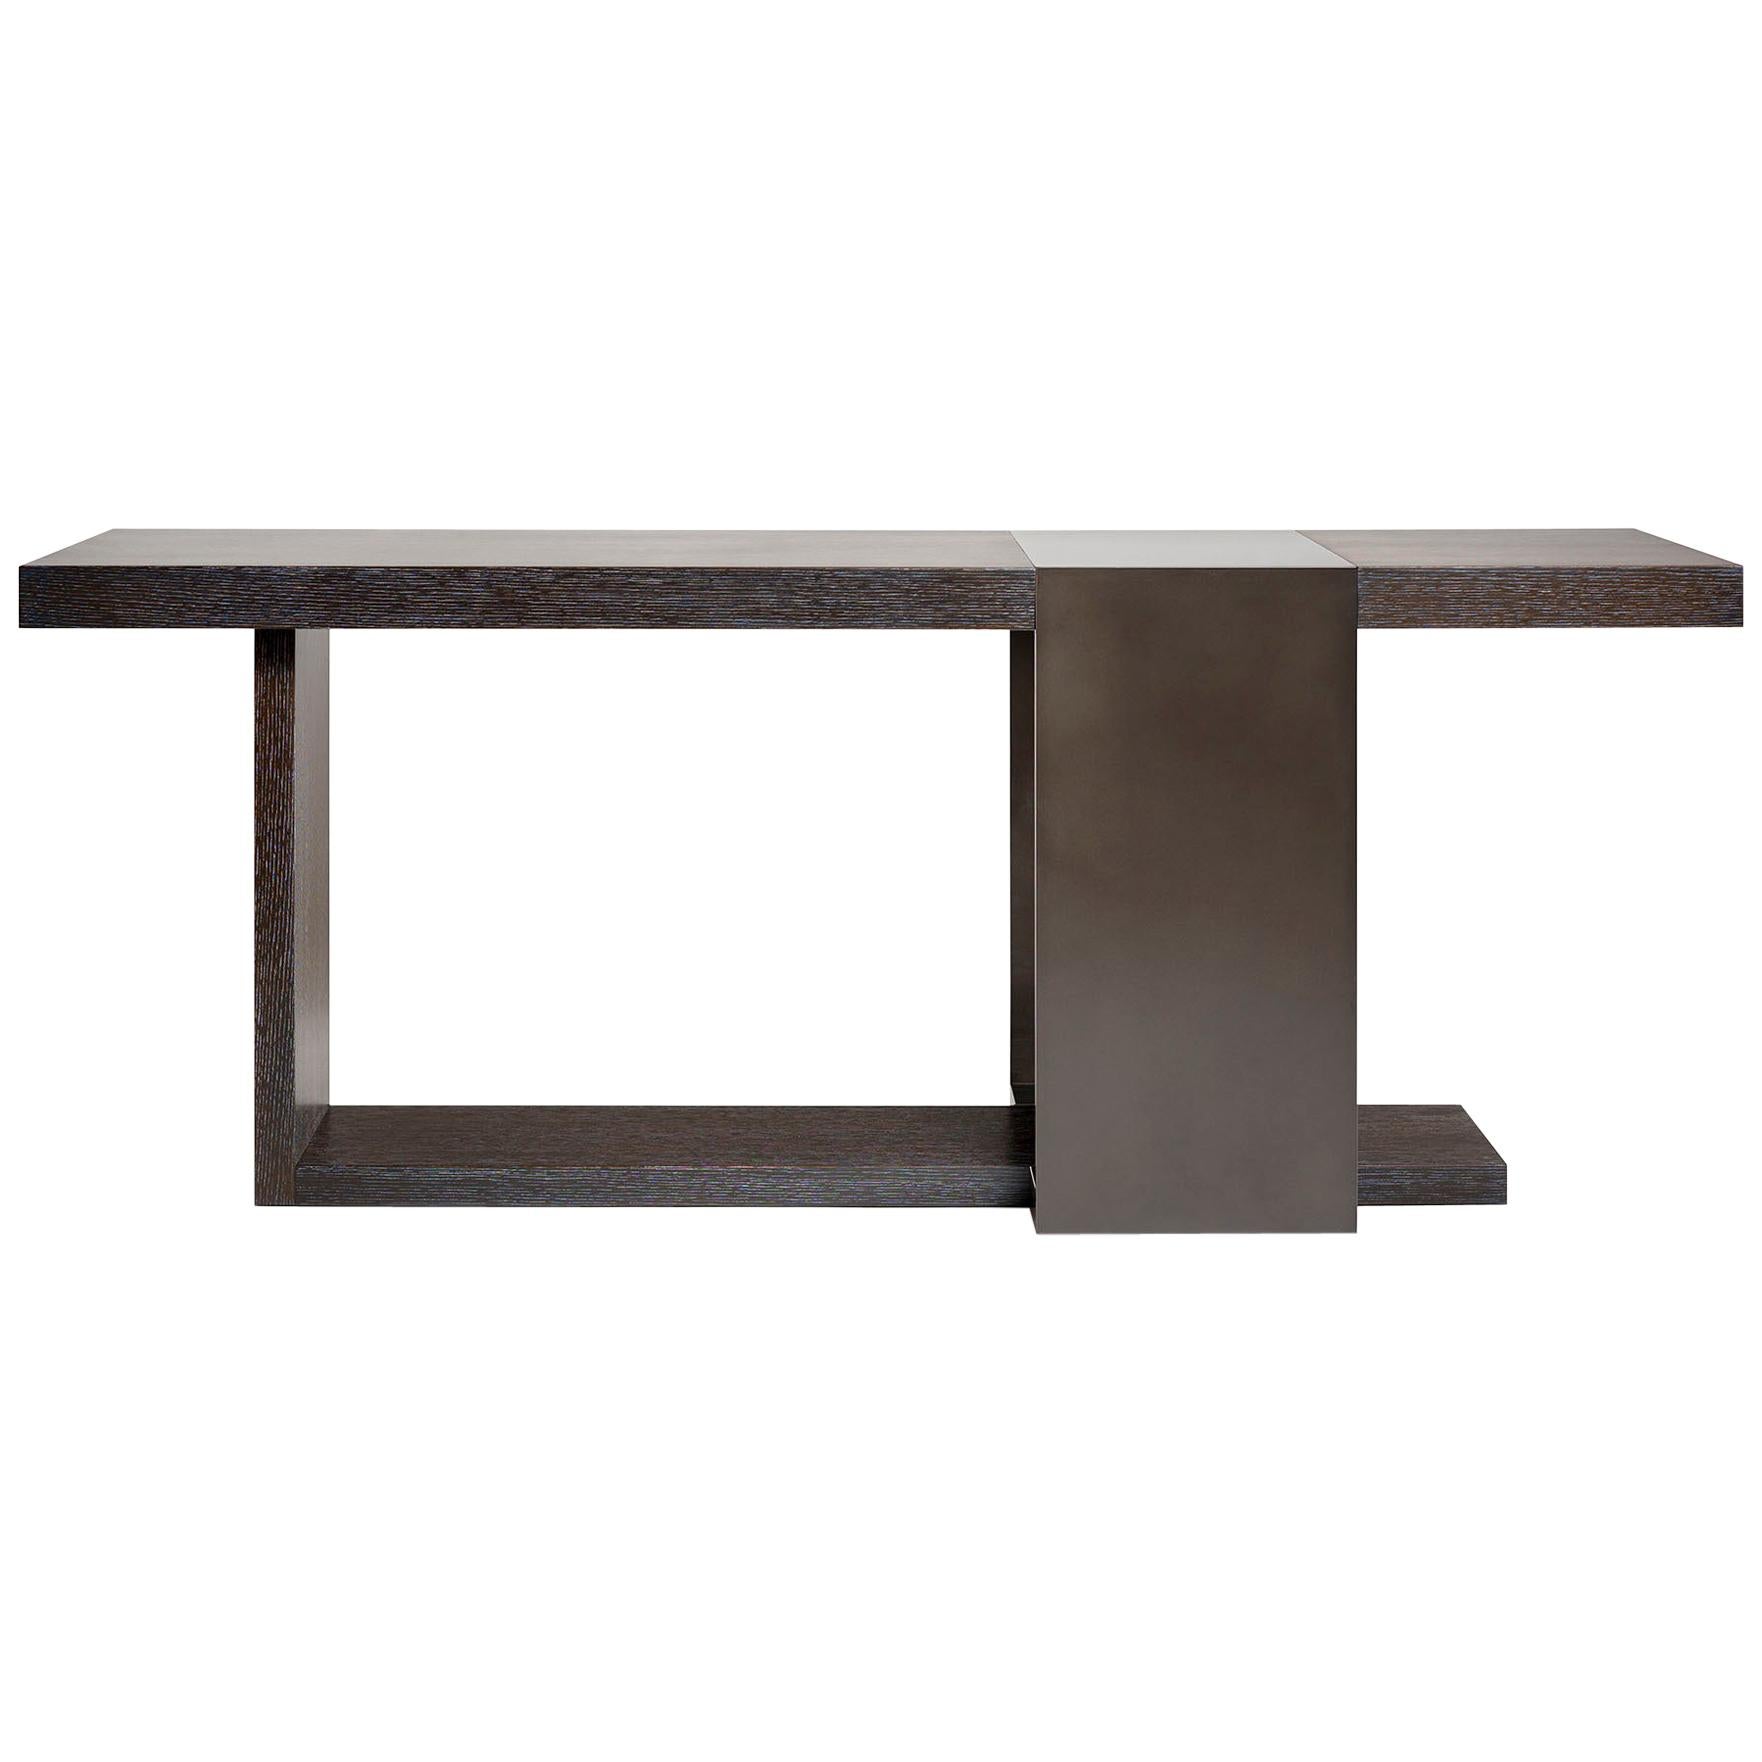 Luma Design Workshop Strap Console Table in Black Metal and Dark Cerused Wood For Sale